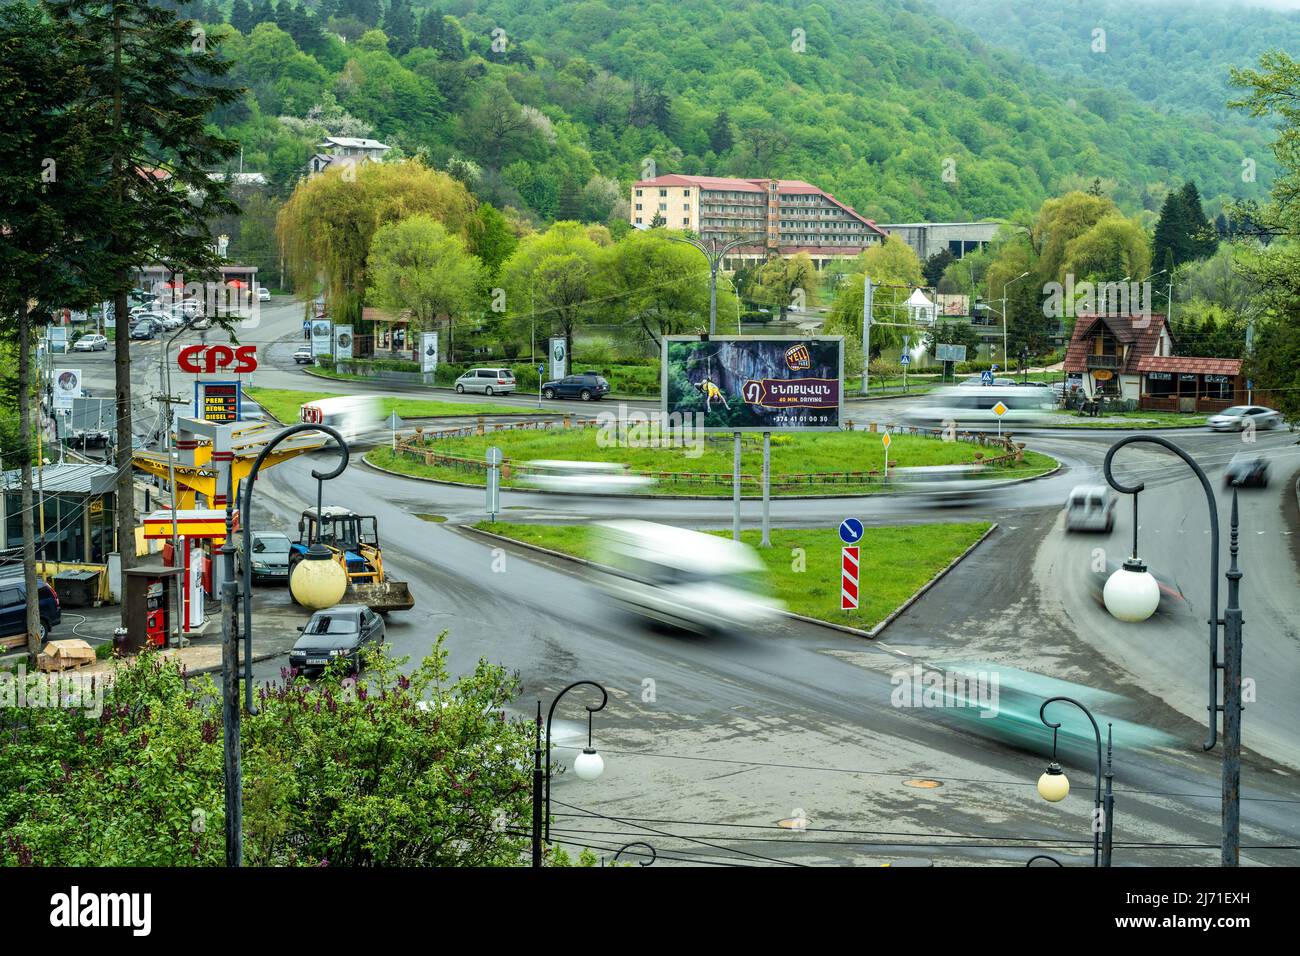 Dilijan, Armenia - May 5, 2022 - Cars drive around and through the roundabout in Dilijan, Armenia, captured with slow shutter speed Stock Photo